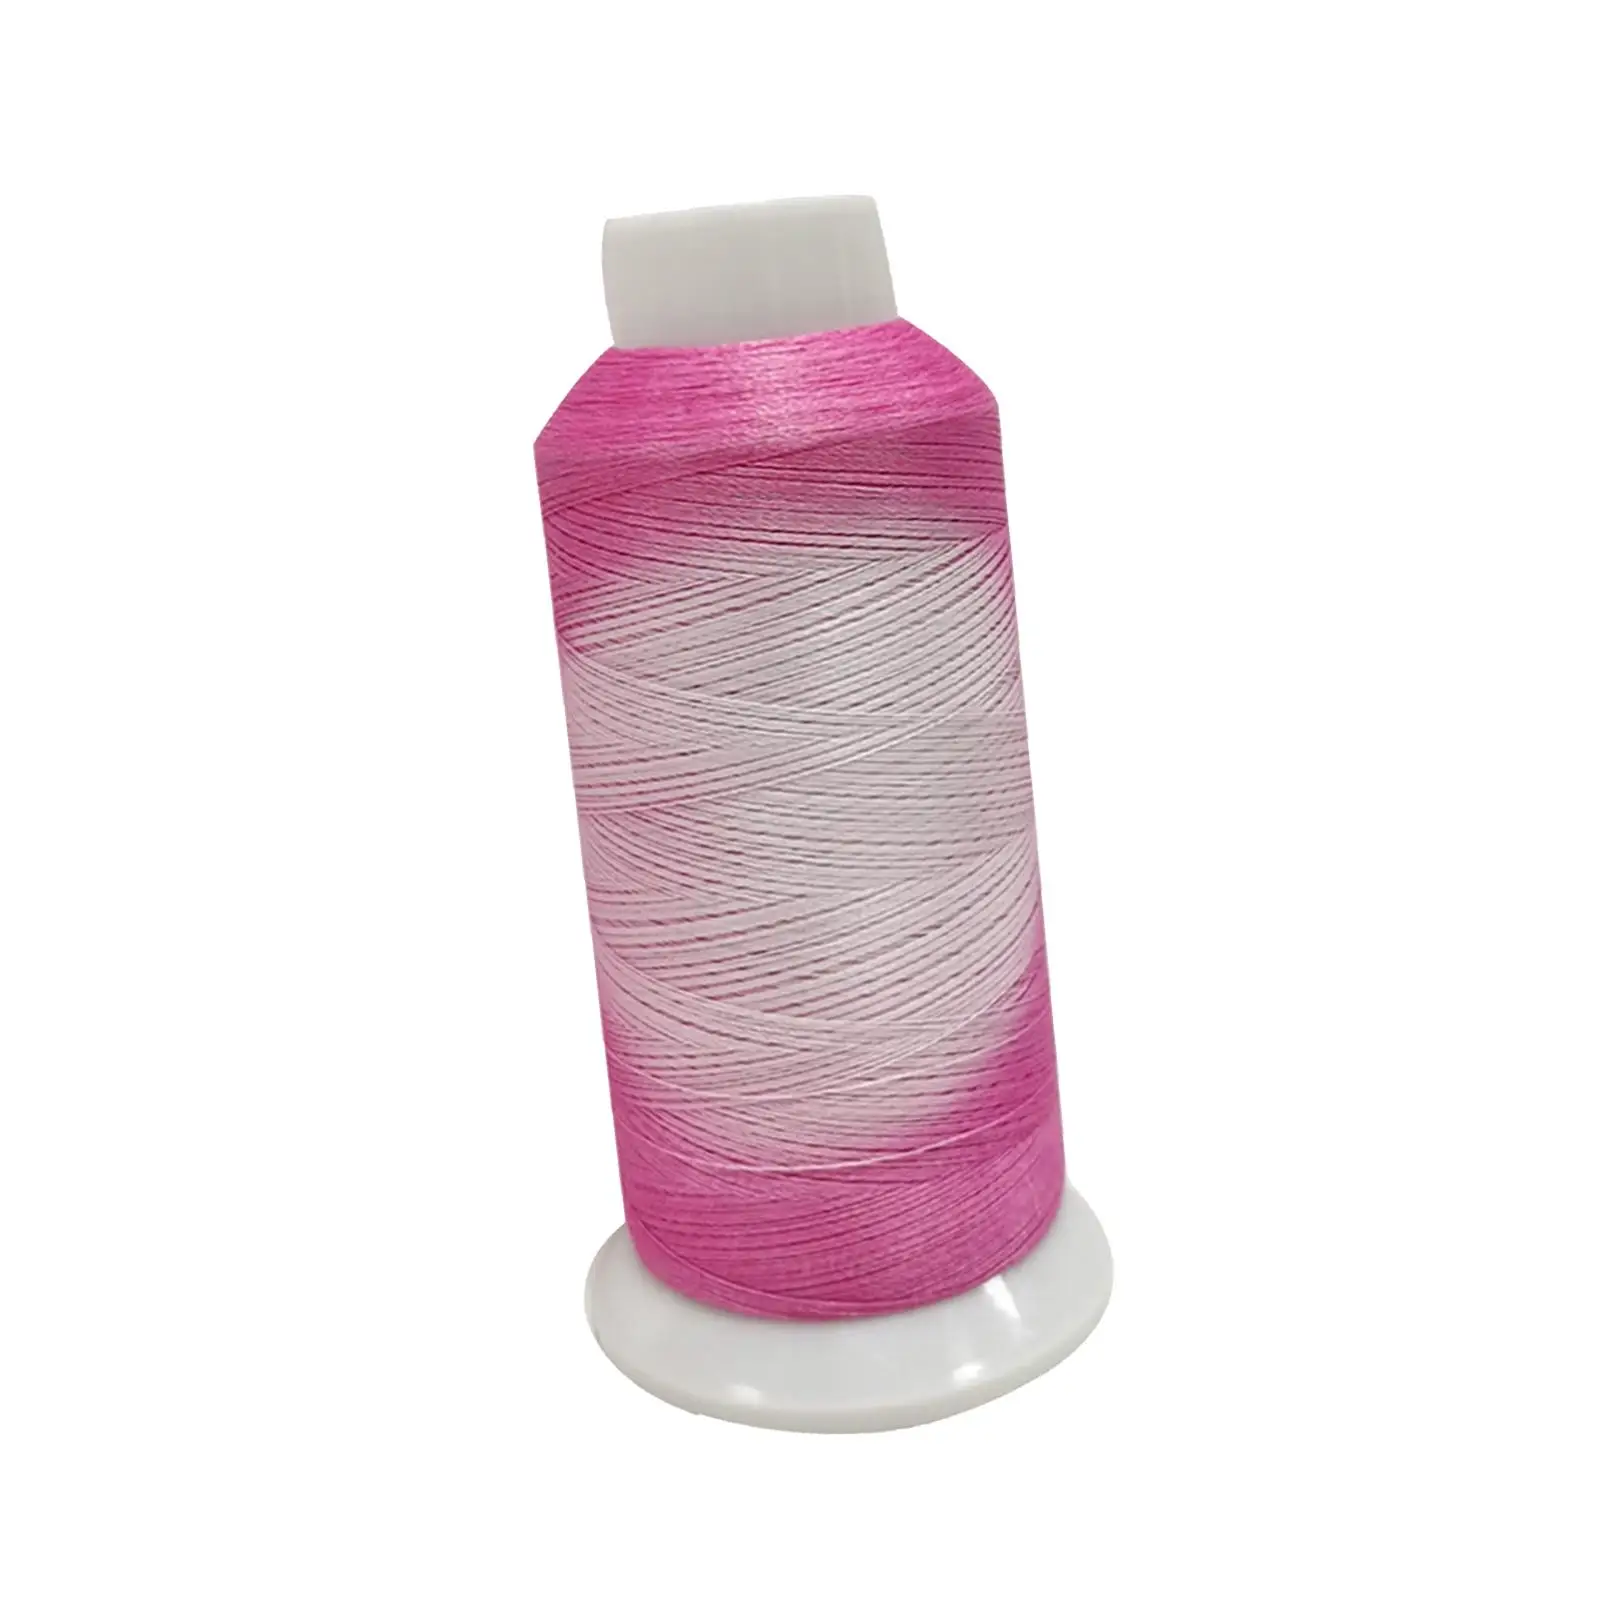 Colorful Color Changing Thread Embroidery Polyester Sewing Thread Spool Supplies for Sewing Quilting Blanket Hat Scarf